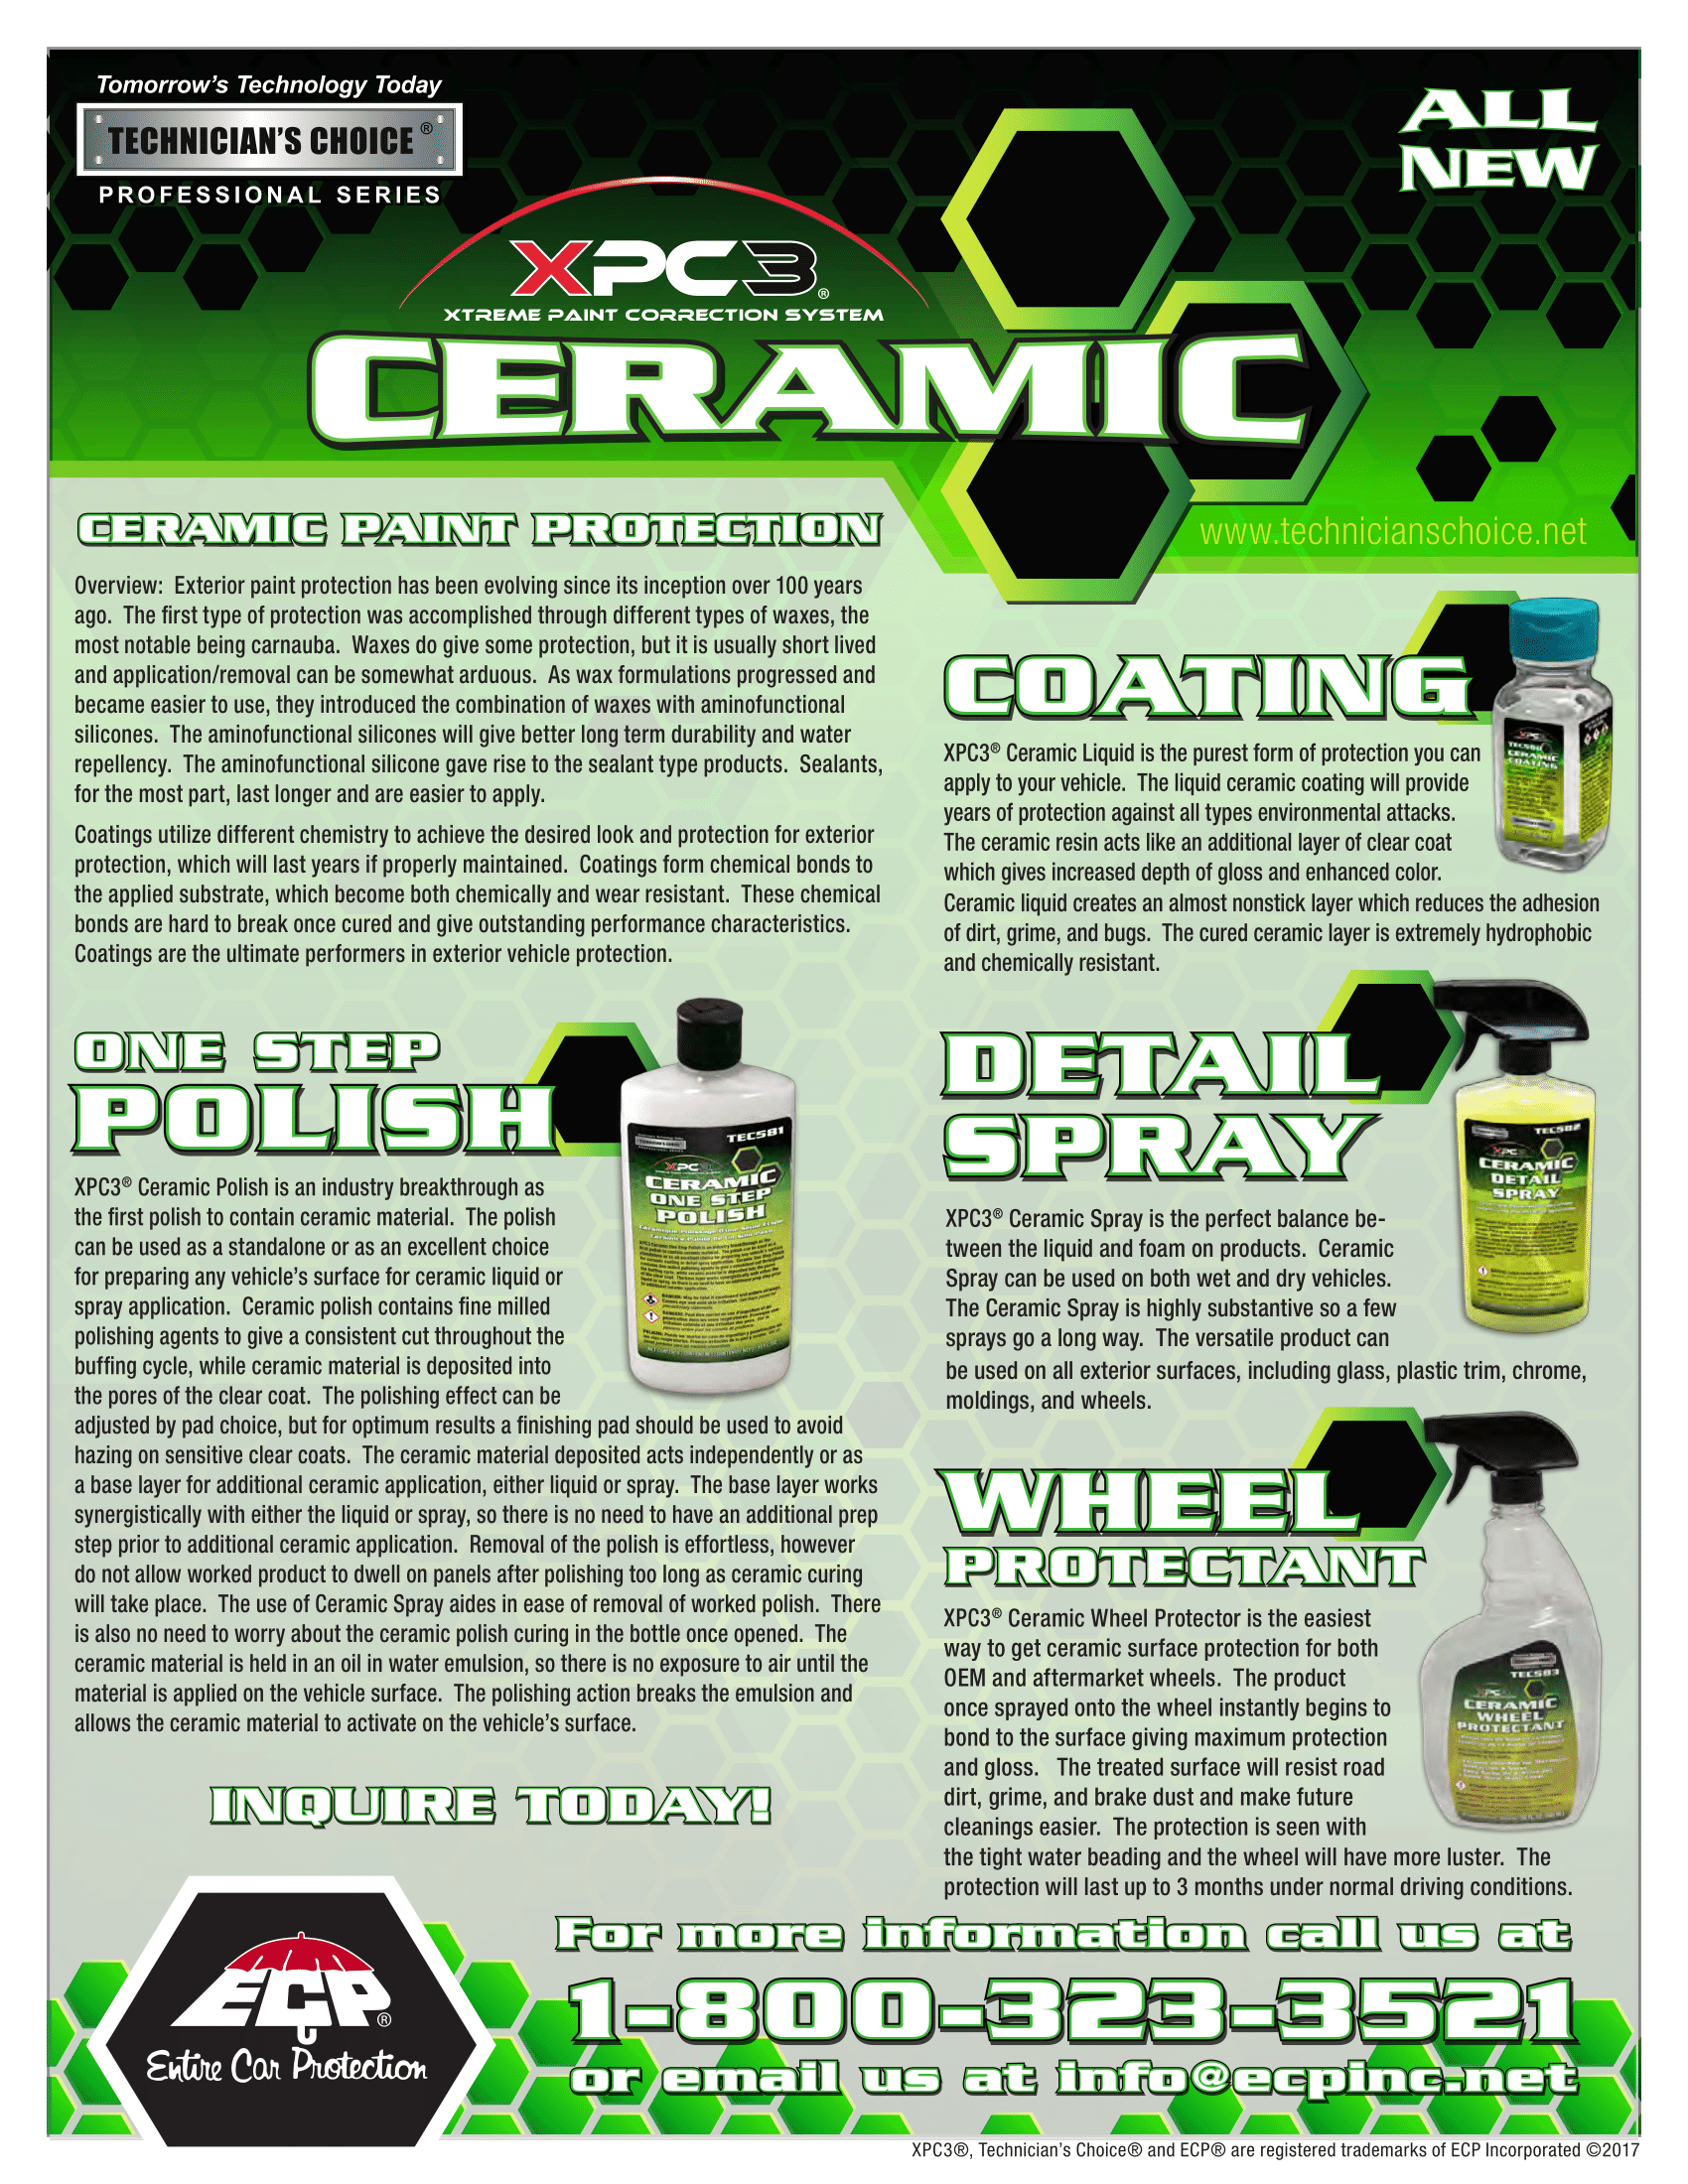 AvalonKing 2 Week Update And Technicians Choice TEC582 Ceramic Detail Spray!  